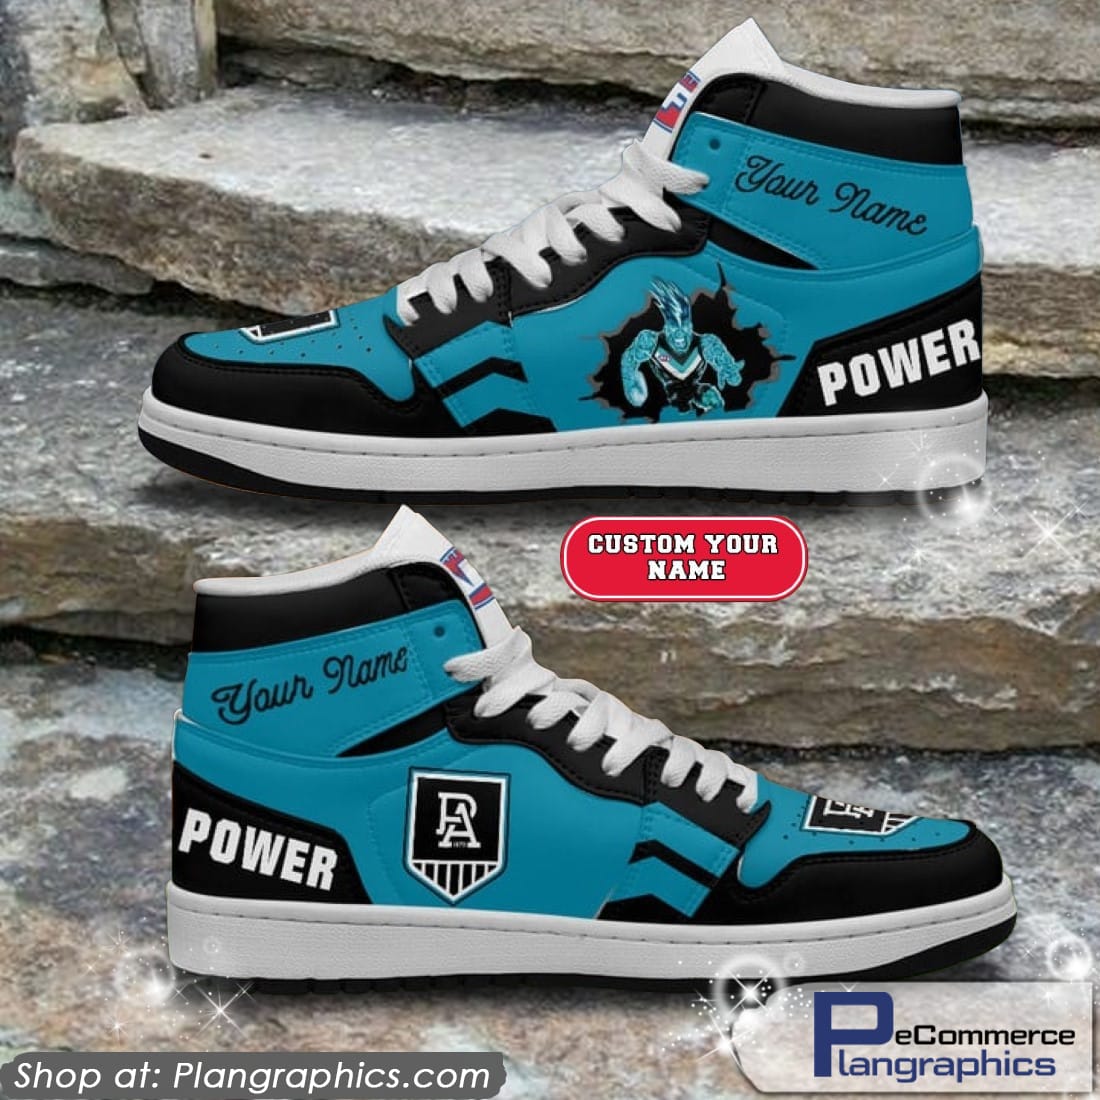 Port Adelaide Power Football Club AFL Personalized Shoess